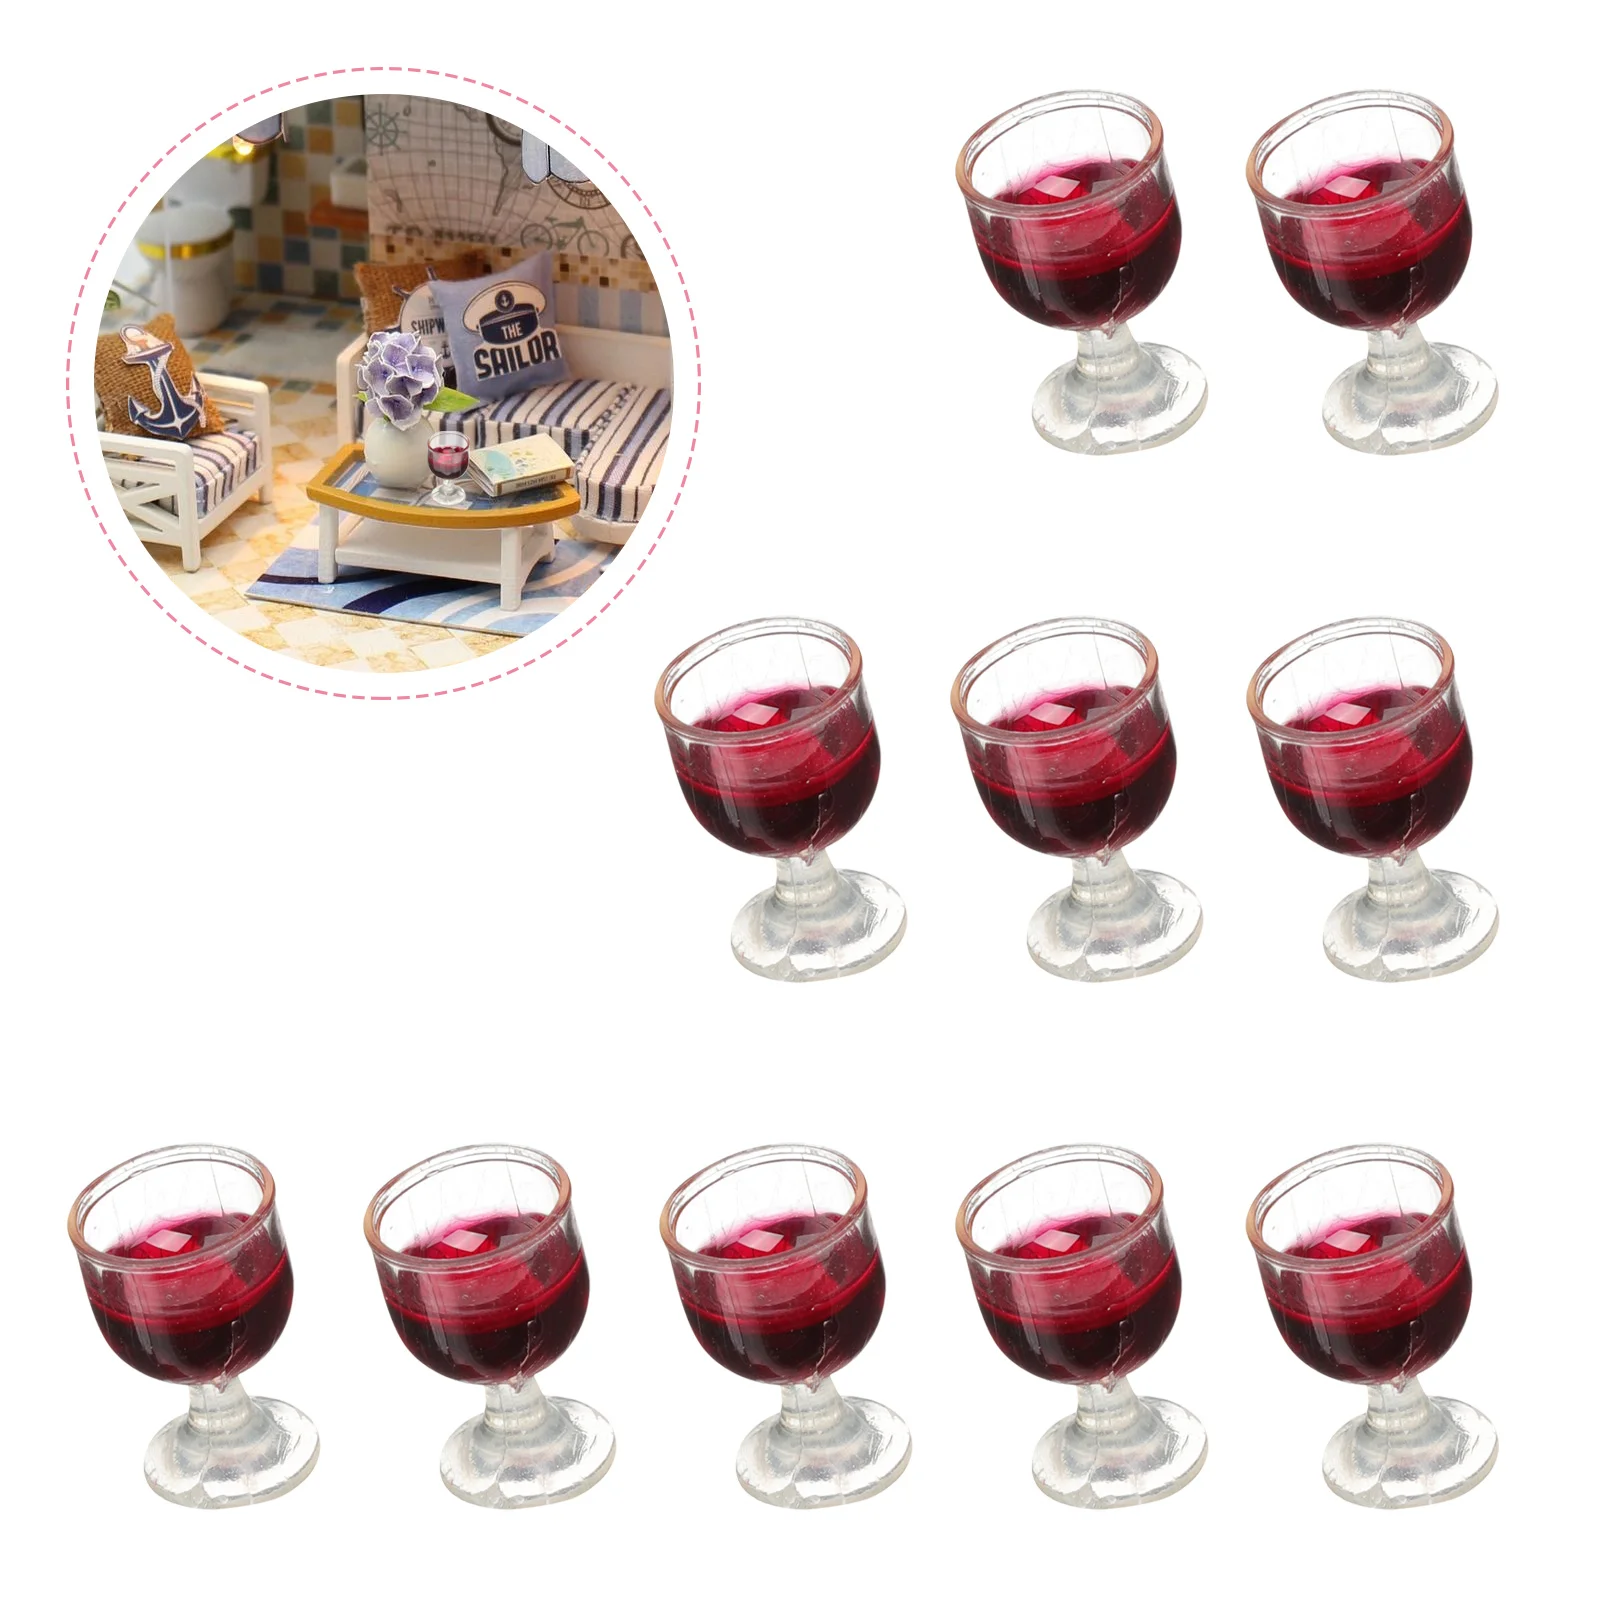 

10 Pcs Dollhouse Glass Glasses Decor Miniature Gasses Cake Micro Food Play Props Decoration Cocktail Cup Flute